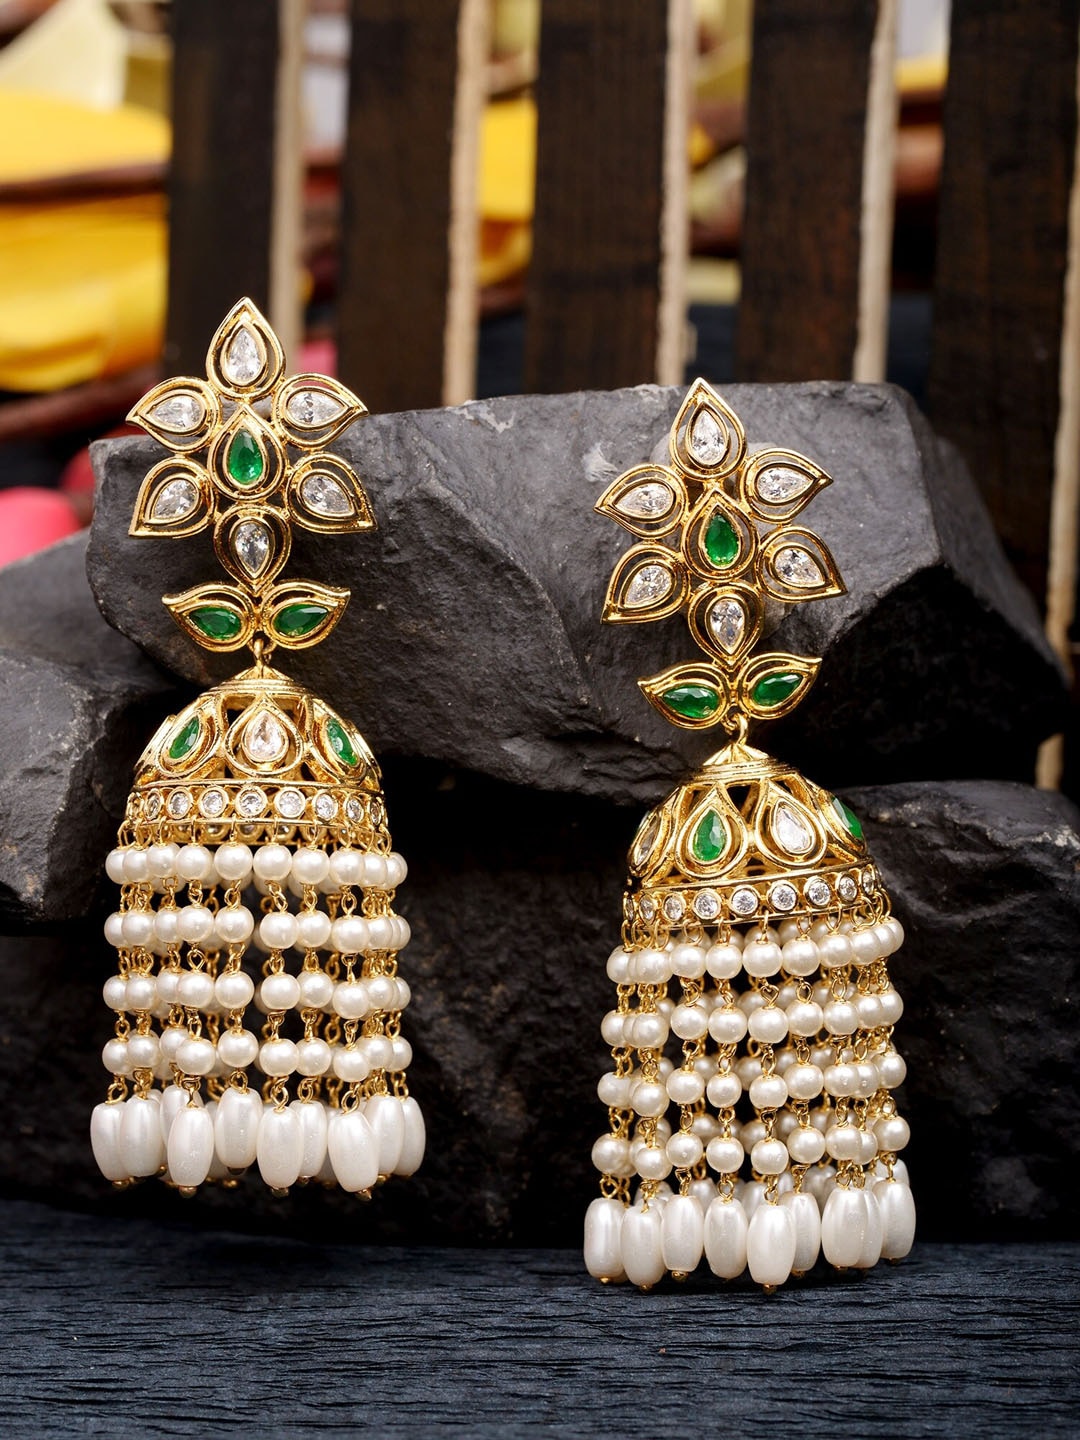 Saraf RS Jewellery Gold-Toned Dome Shaped Jhumkas Earrings Price in India